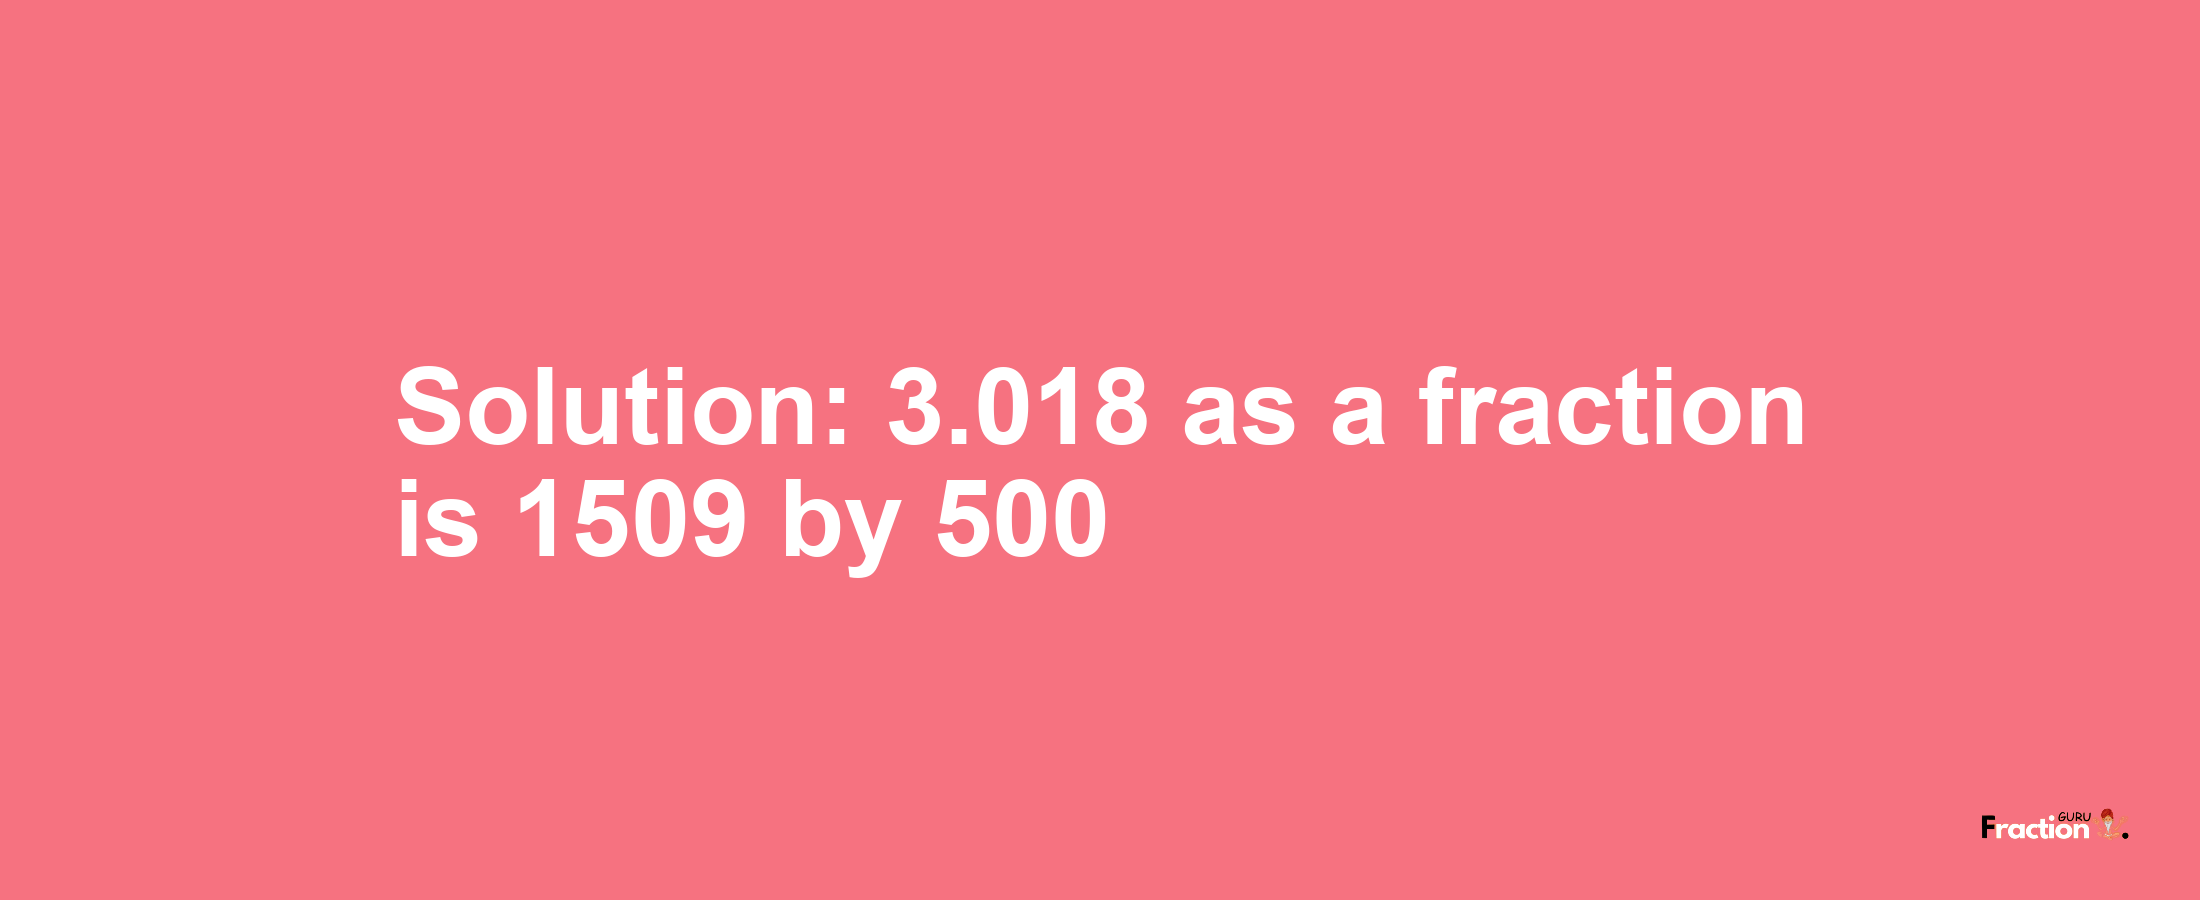 Solution:3.018 as a fraction is 1509/500